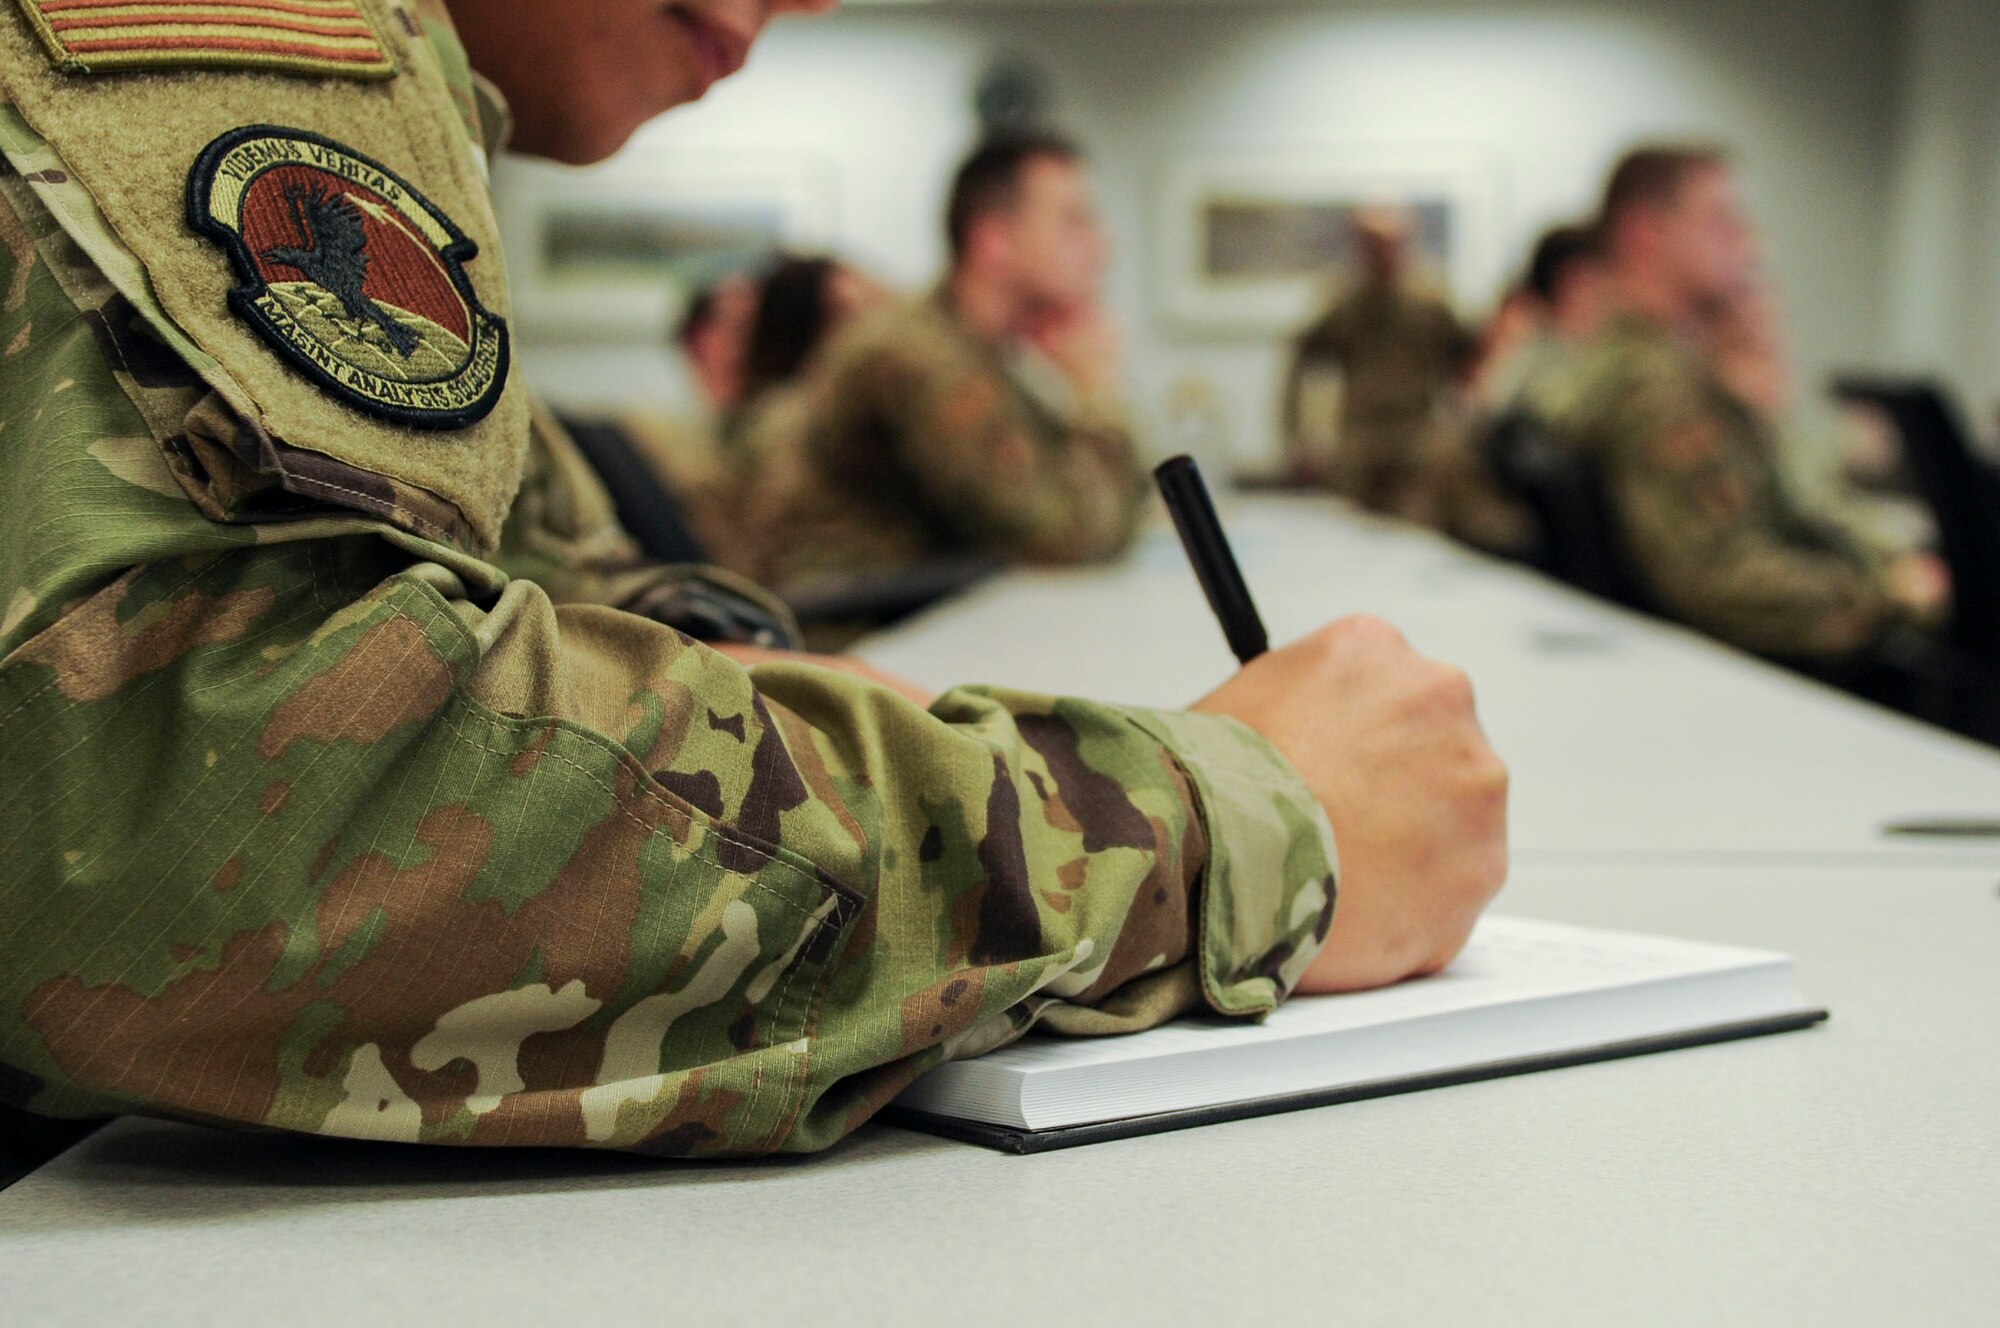 1st Lt. Enoc Flores, National Air and Space Intelligence Center, Measurement and Signature Intelligence Analysis Squadron executive officer, takes notes during a First Sergeant’s Panel on Wright-Patterson Air Force Base, Ohio, Dec. 11, 2019. This was the first time Flores had attended such an event, and he stated that he was interested in learning about the progressive discipline model and different supervisory methods. (U.S. Air Force photo by Staff Sgt. Seth Stang)